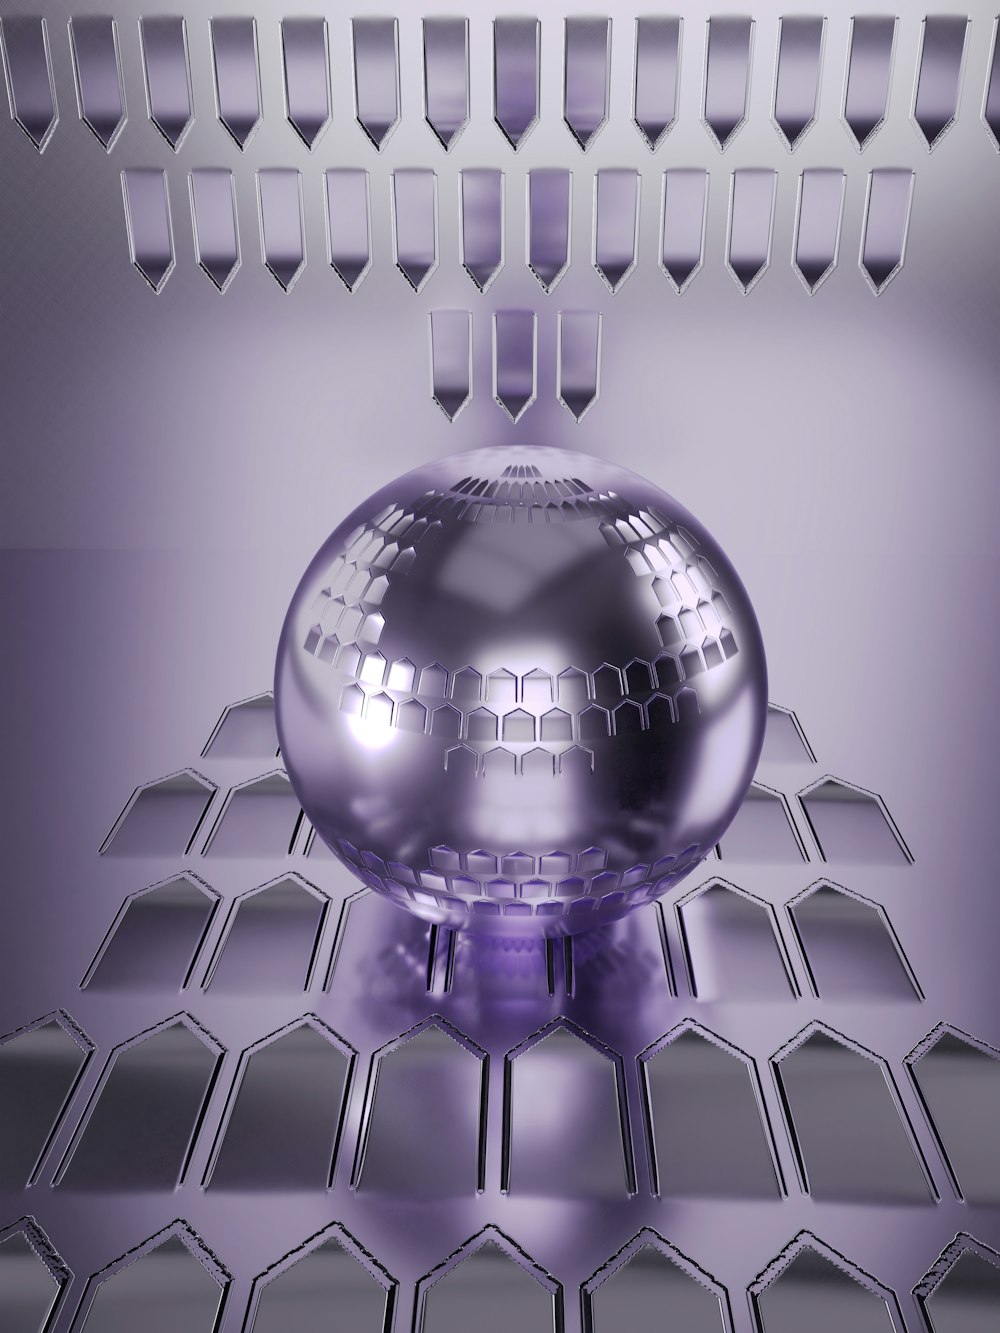 a shiny metallic object is in the middle of a purple background